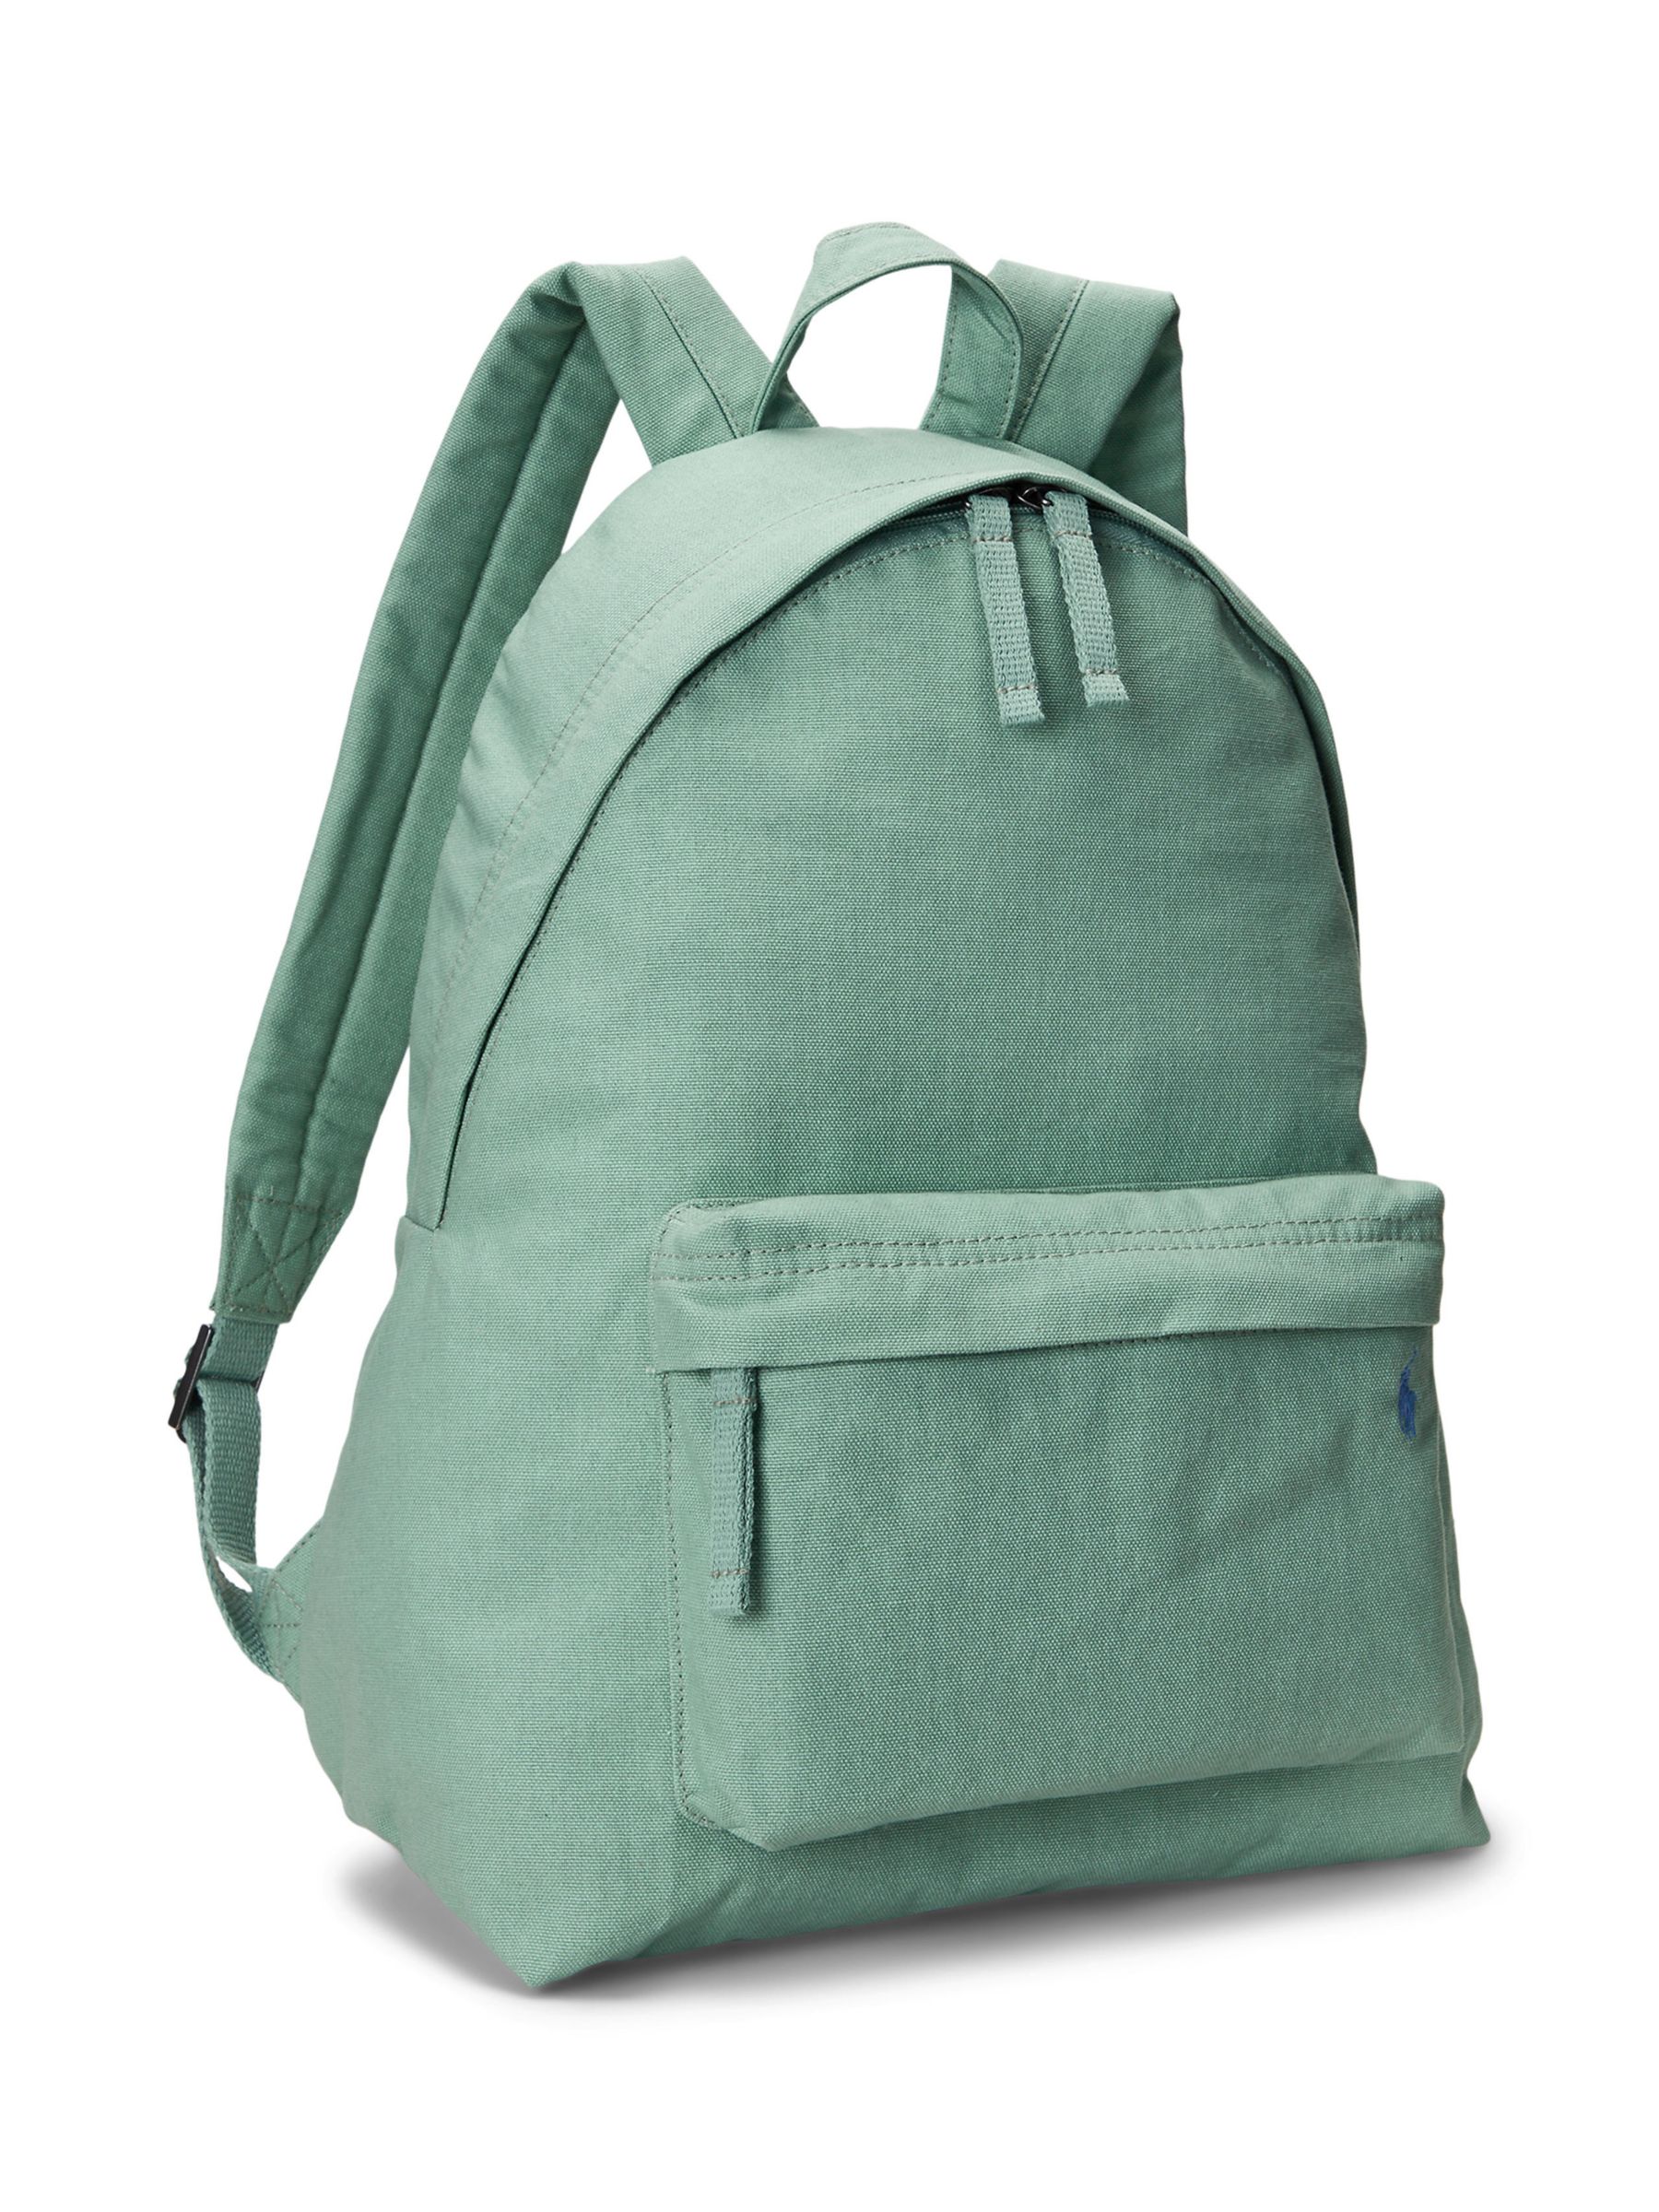 Ralph Lauren Large Canvas Backpack, Faded Mint at John Lewis & Partners